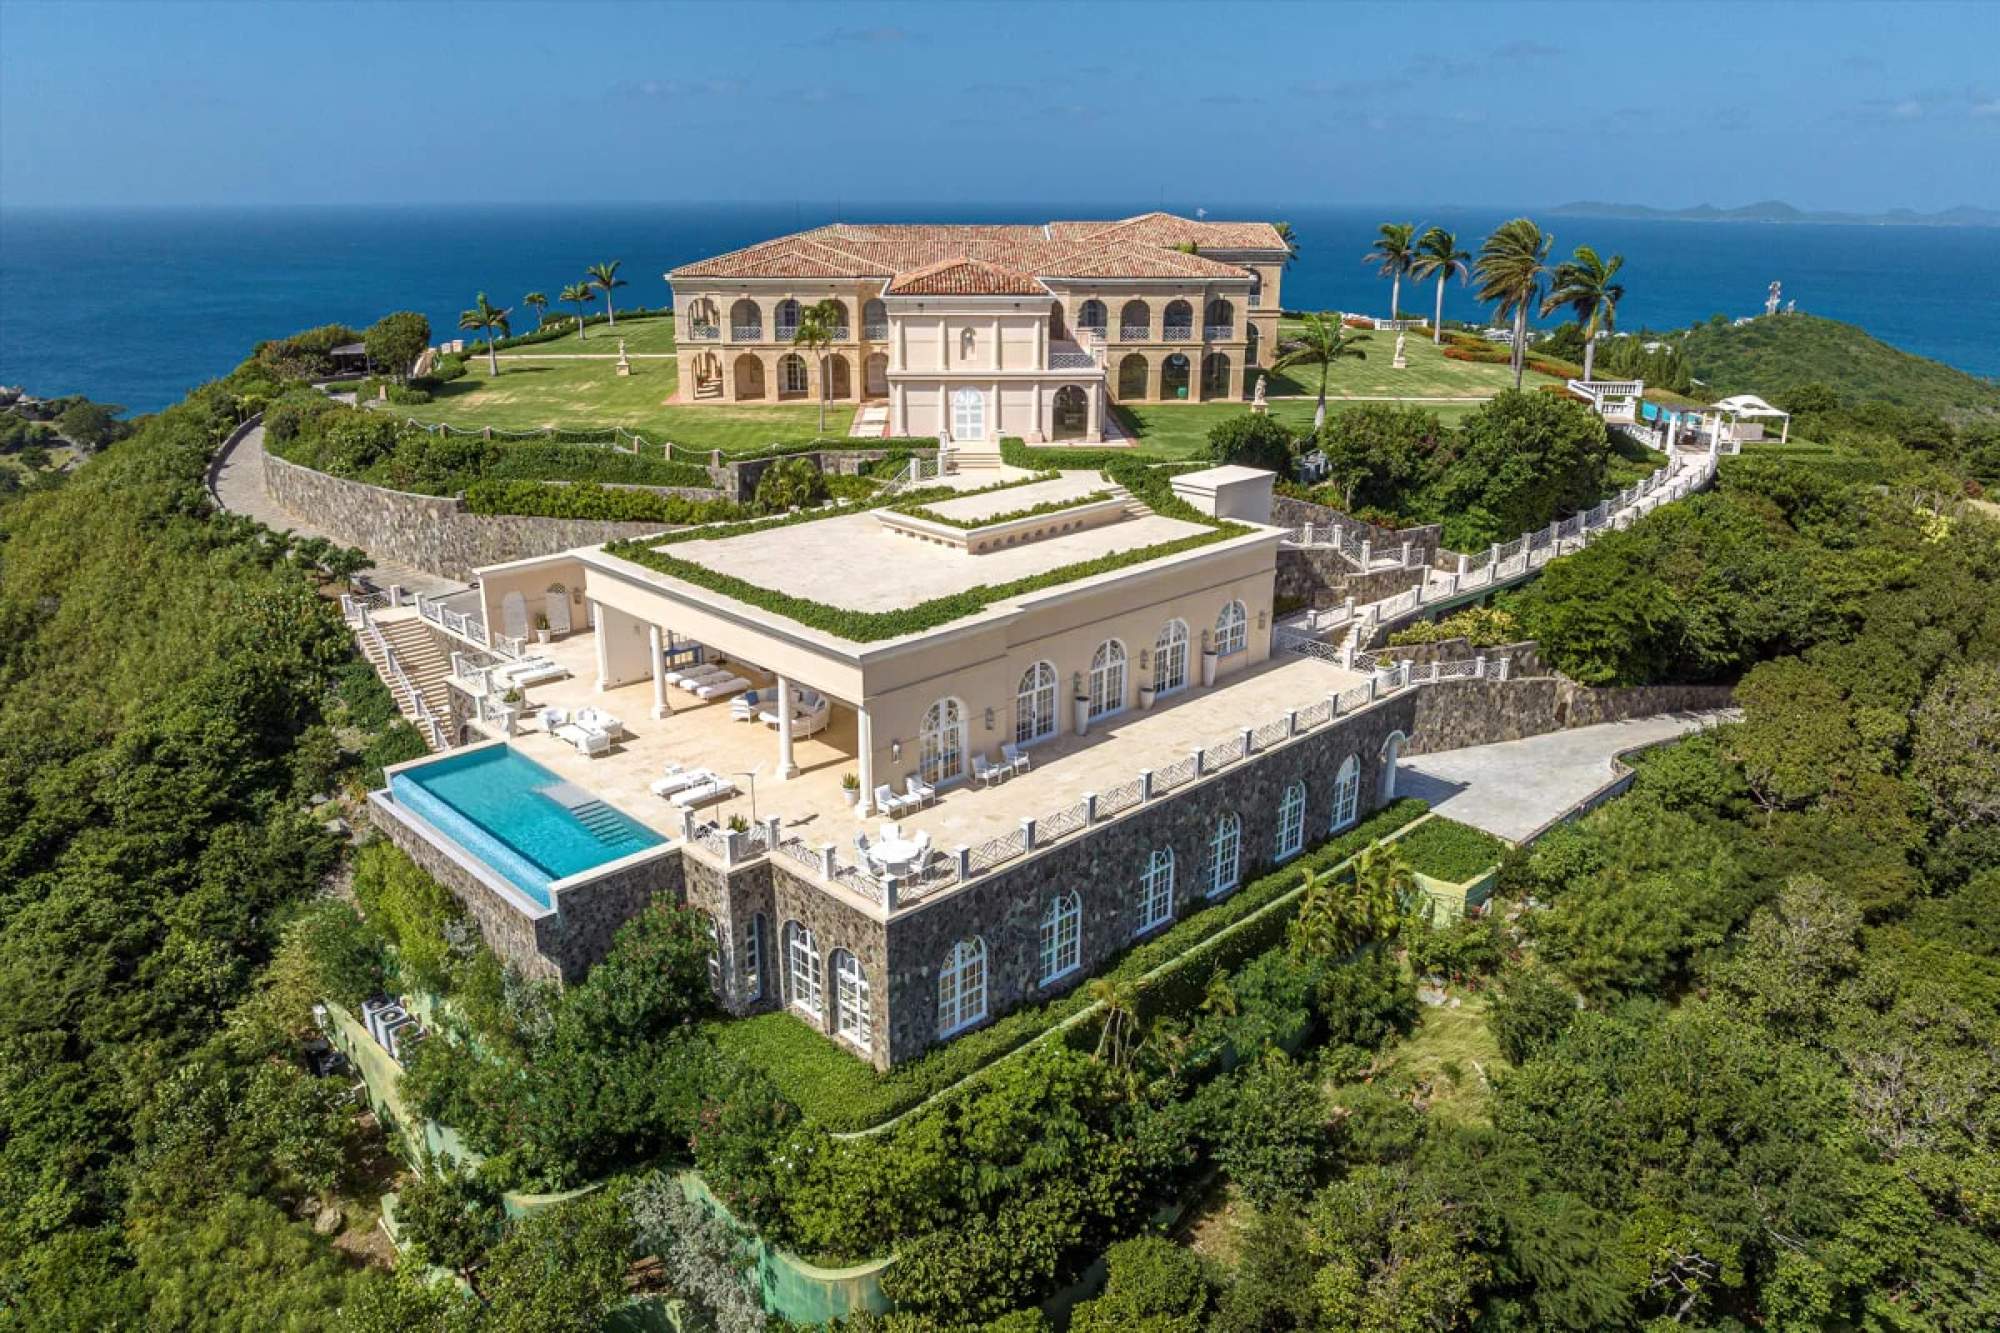 Inside Mustiques US Million Mega Mansion Up For Sale The Most Expensive Home In The